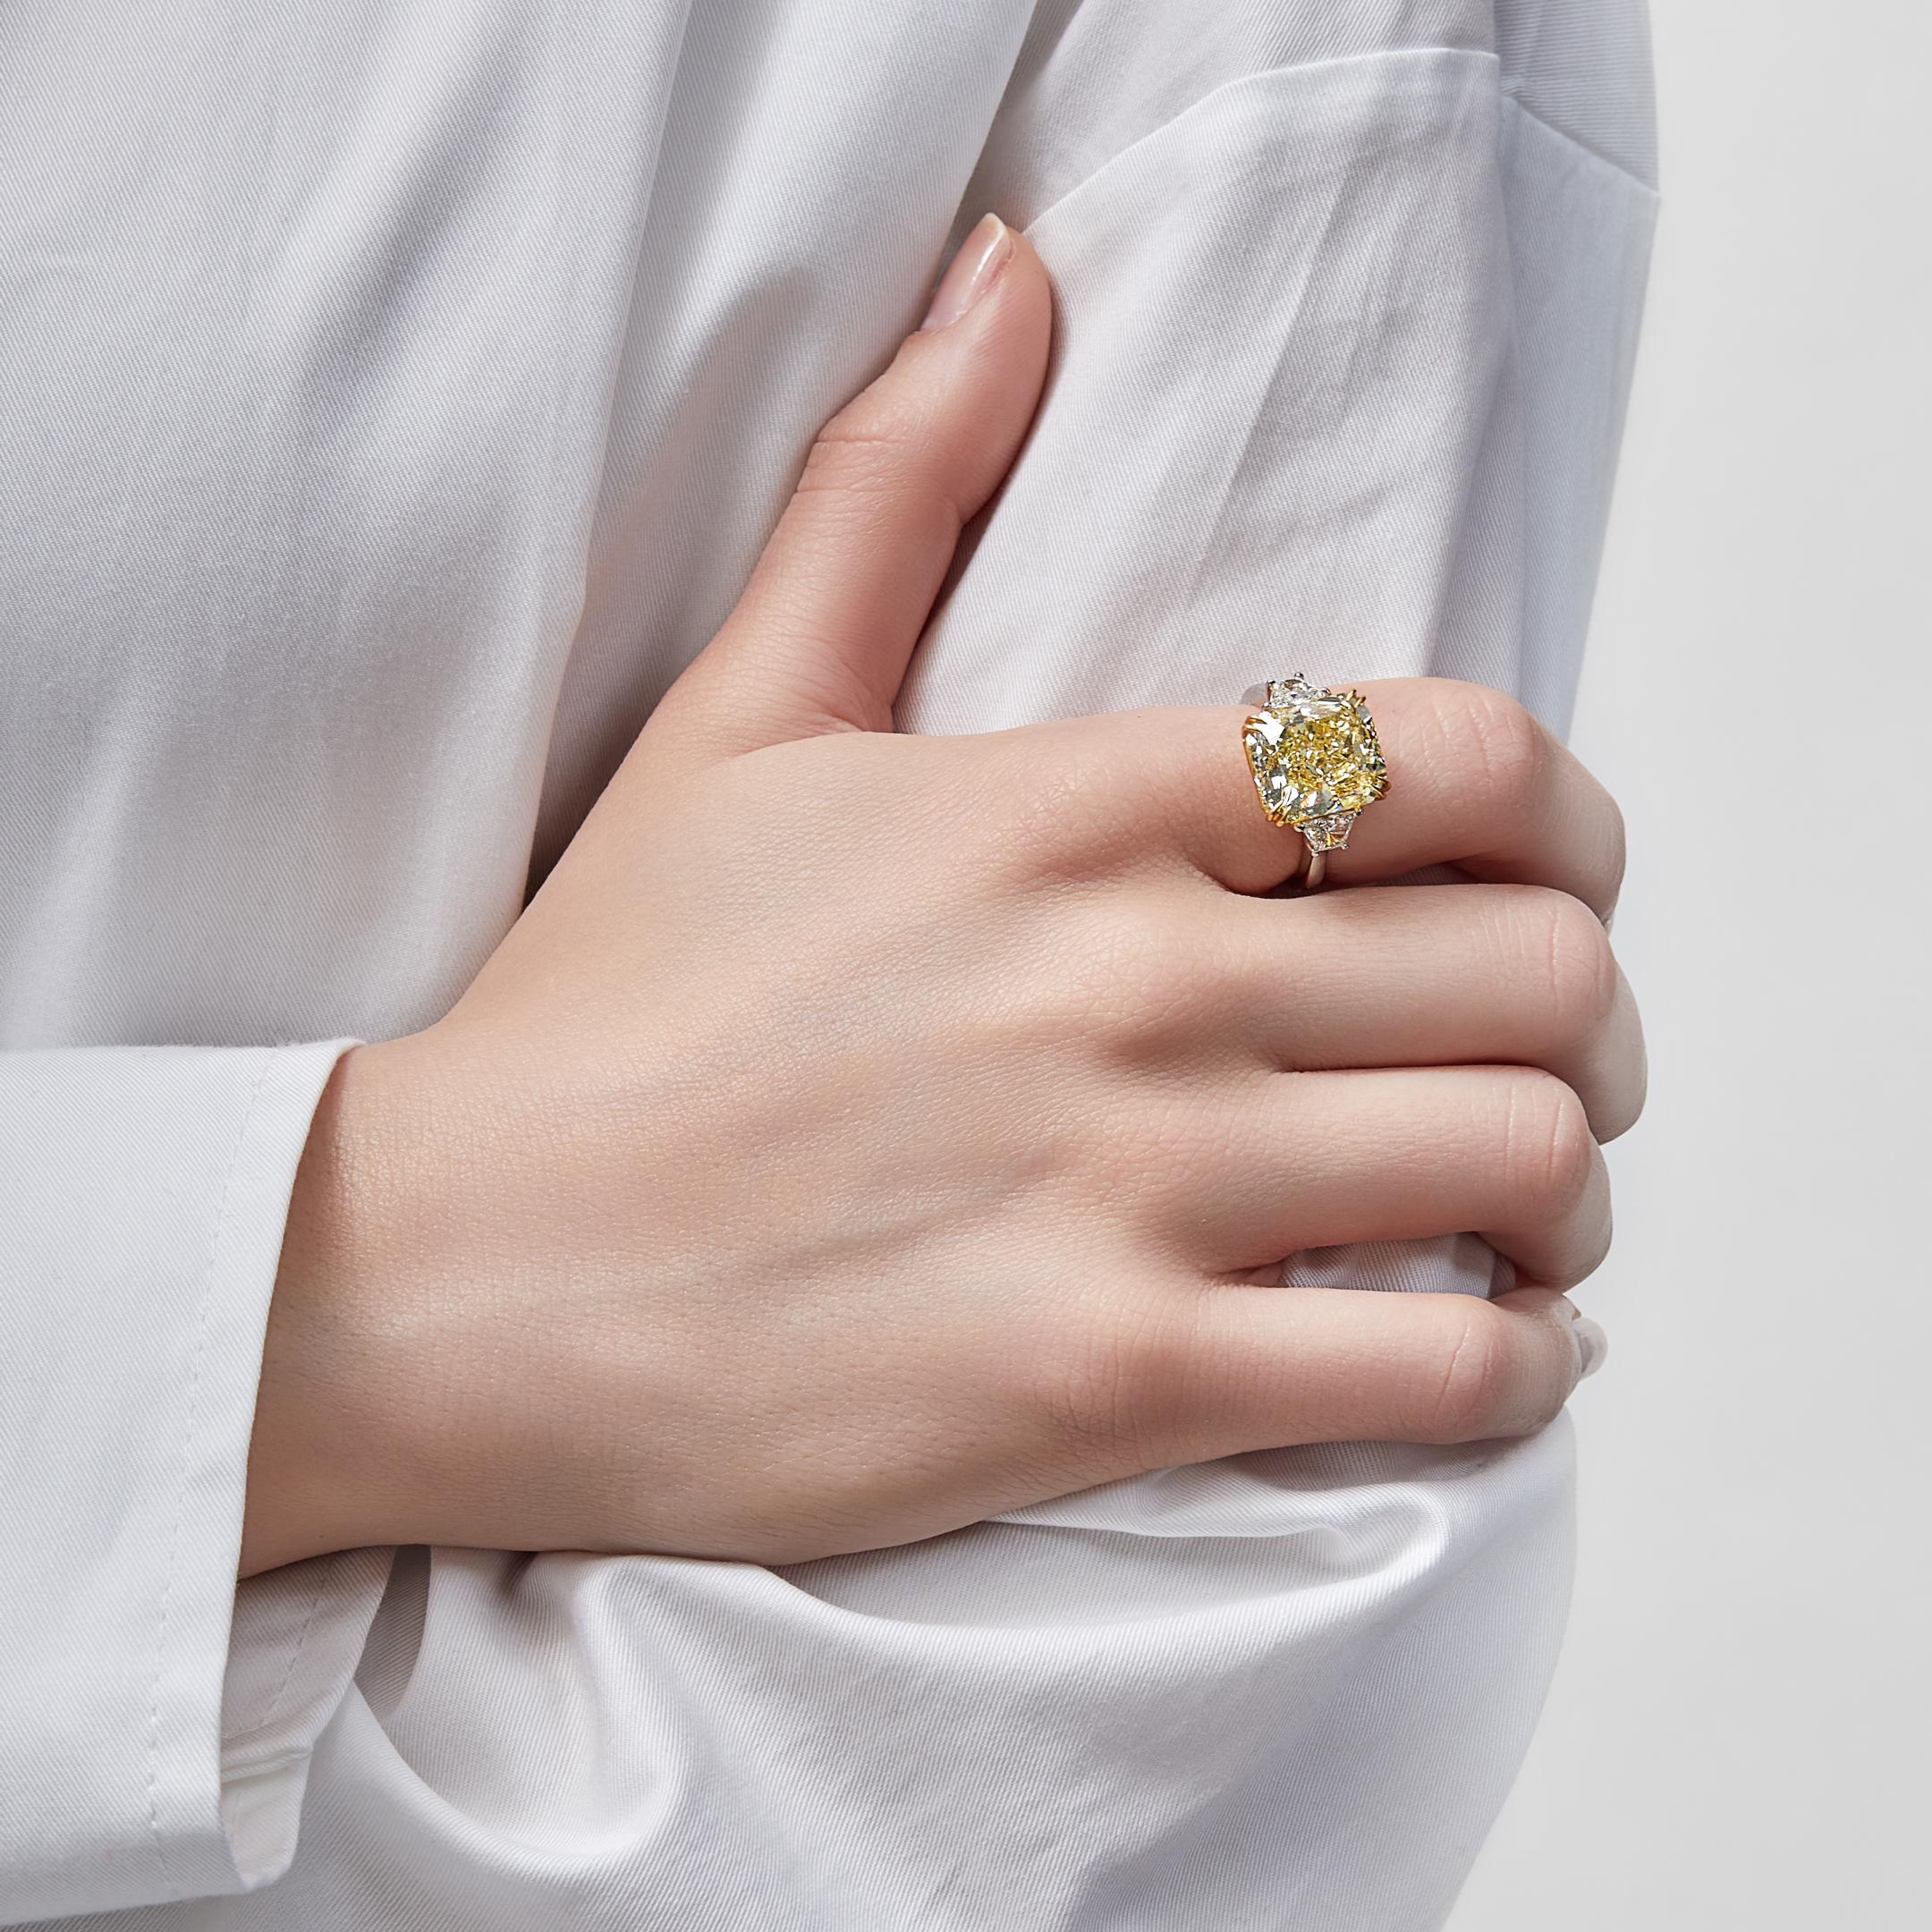 Elevate your style with our stunning Intense Yellow Radiant Diamond Ring. This exquisite piece features a mesmerizing yellow diamond in a cut-cornered rectangular cut.
The captivating Fancy Intense Yellow with an impressive weight of a total of 9.38